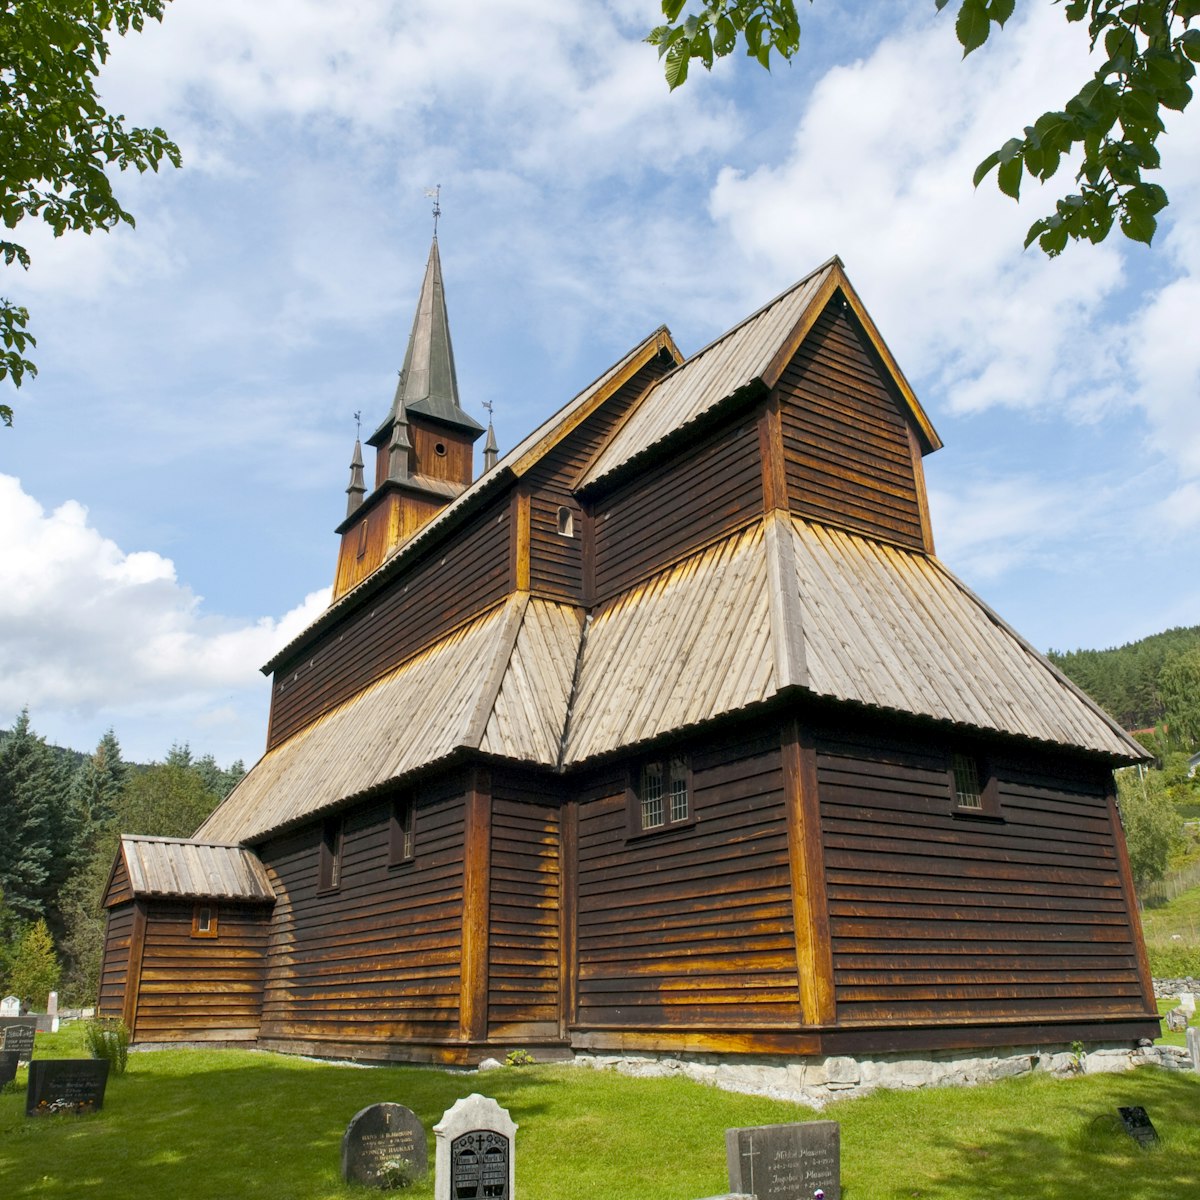 Kaupanger stave church (Kaupanger stavkyrkje) is the largest stave church in the Sogn og Fjordane, and is situated in the town of Kaupanger, Norway. The nave is supported by 22 staves, 8 on each of the longer sides and 3 on each of the shorter. The elevated chancel is carried by 4 free standing staves. The church has the largest number of staves to be found in any one stave church. It is still in use as a parish church, having been in use continuously since its erection.